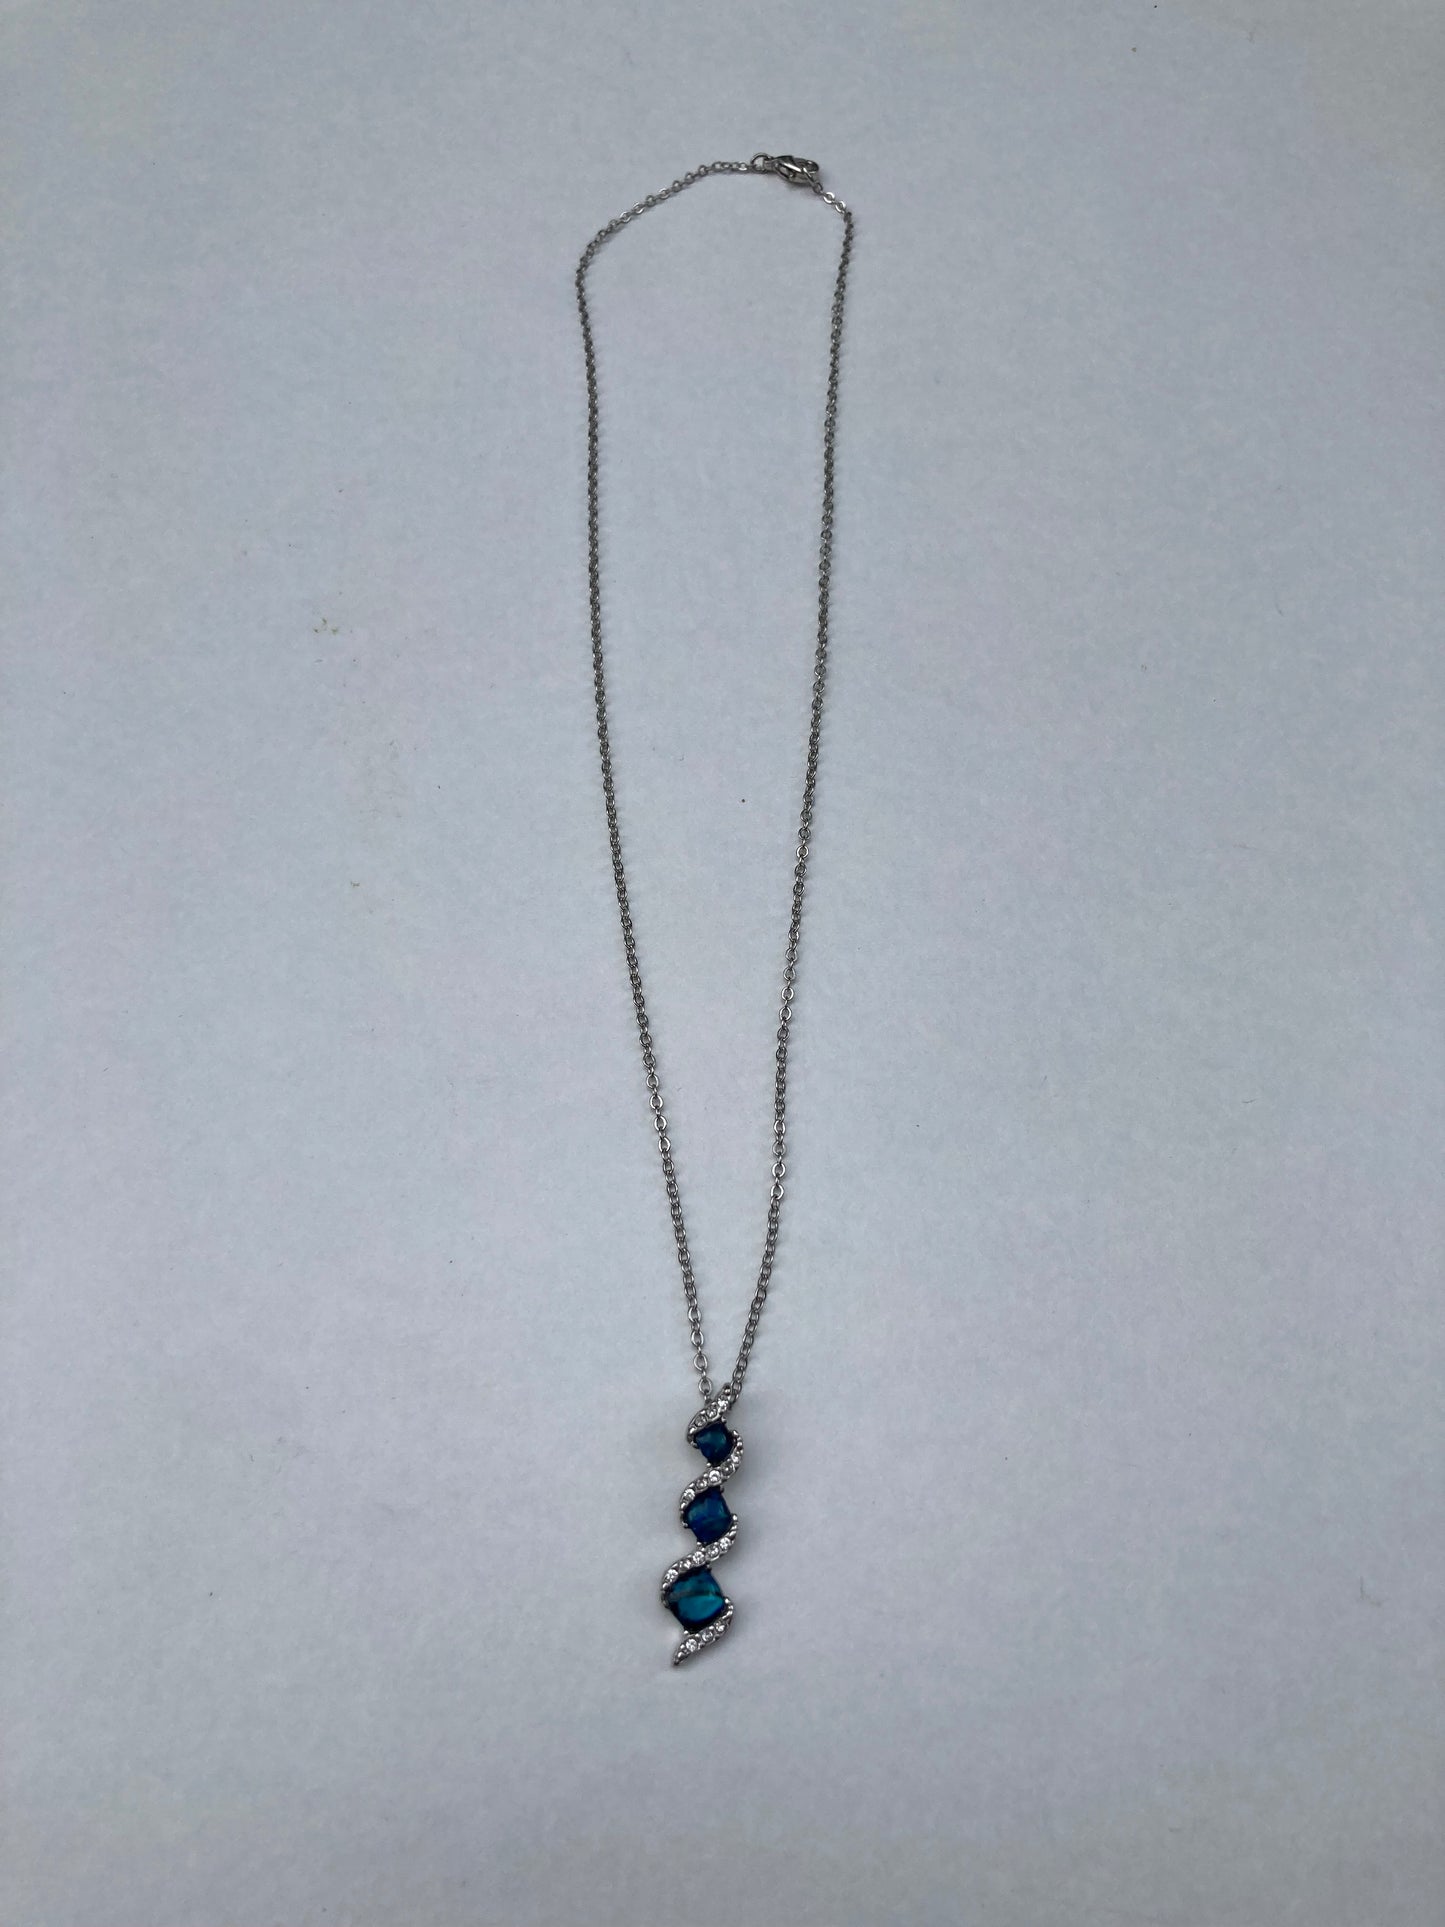 Blue and White Twist Set in Silver Pendant Necklace